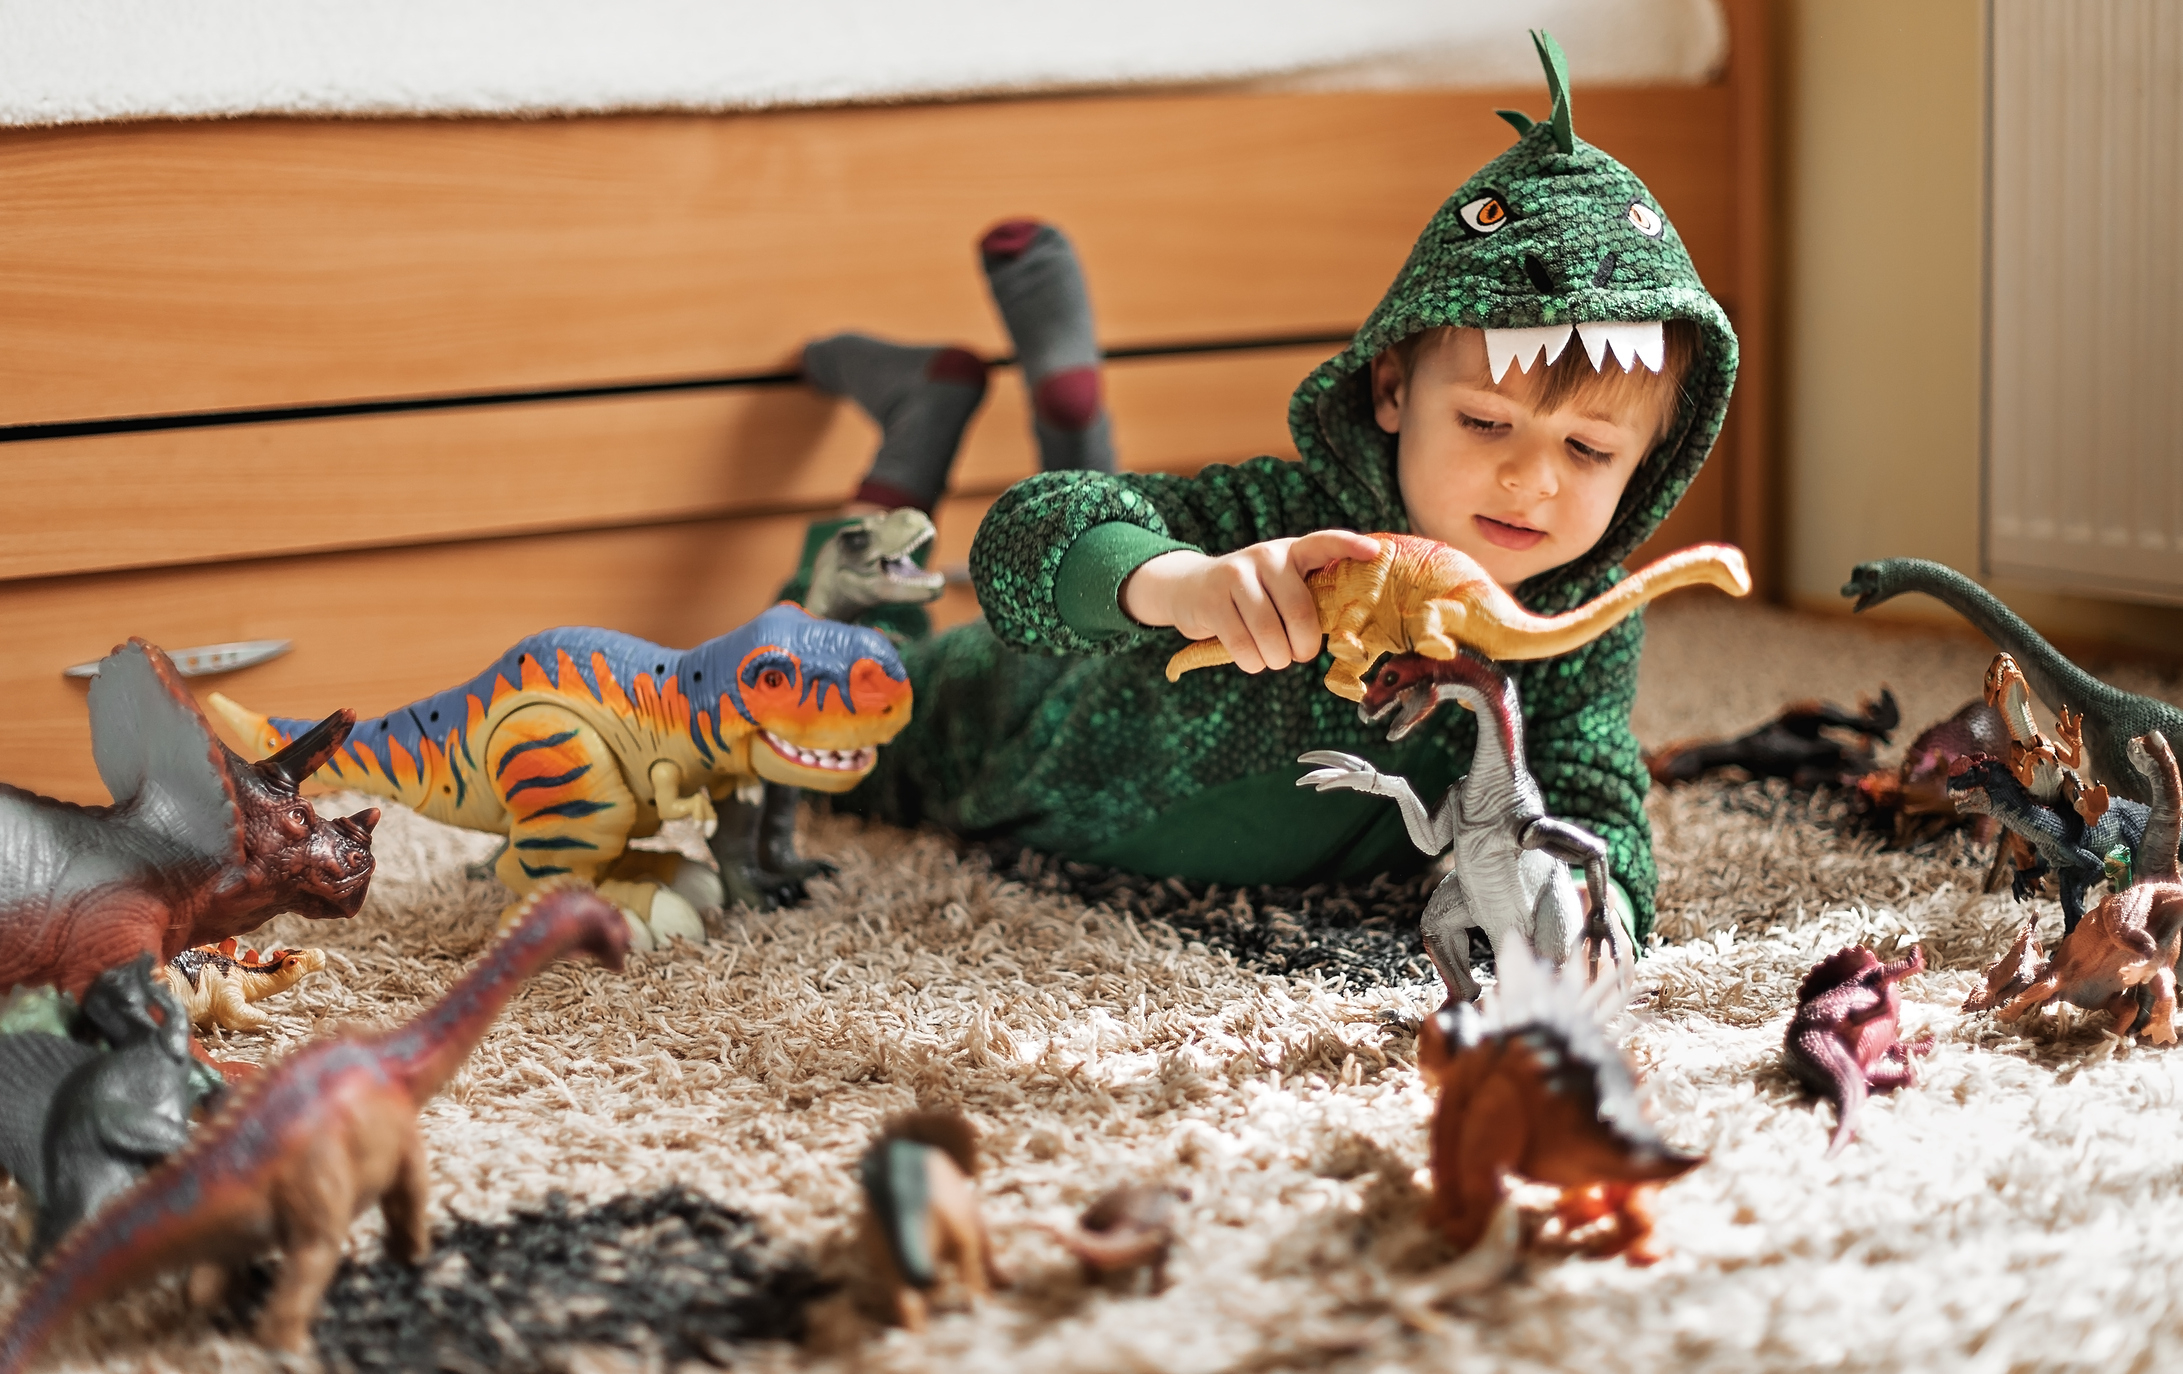 A little boy dressed as a dinosaur and playing with dinosaur toys